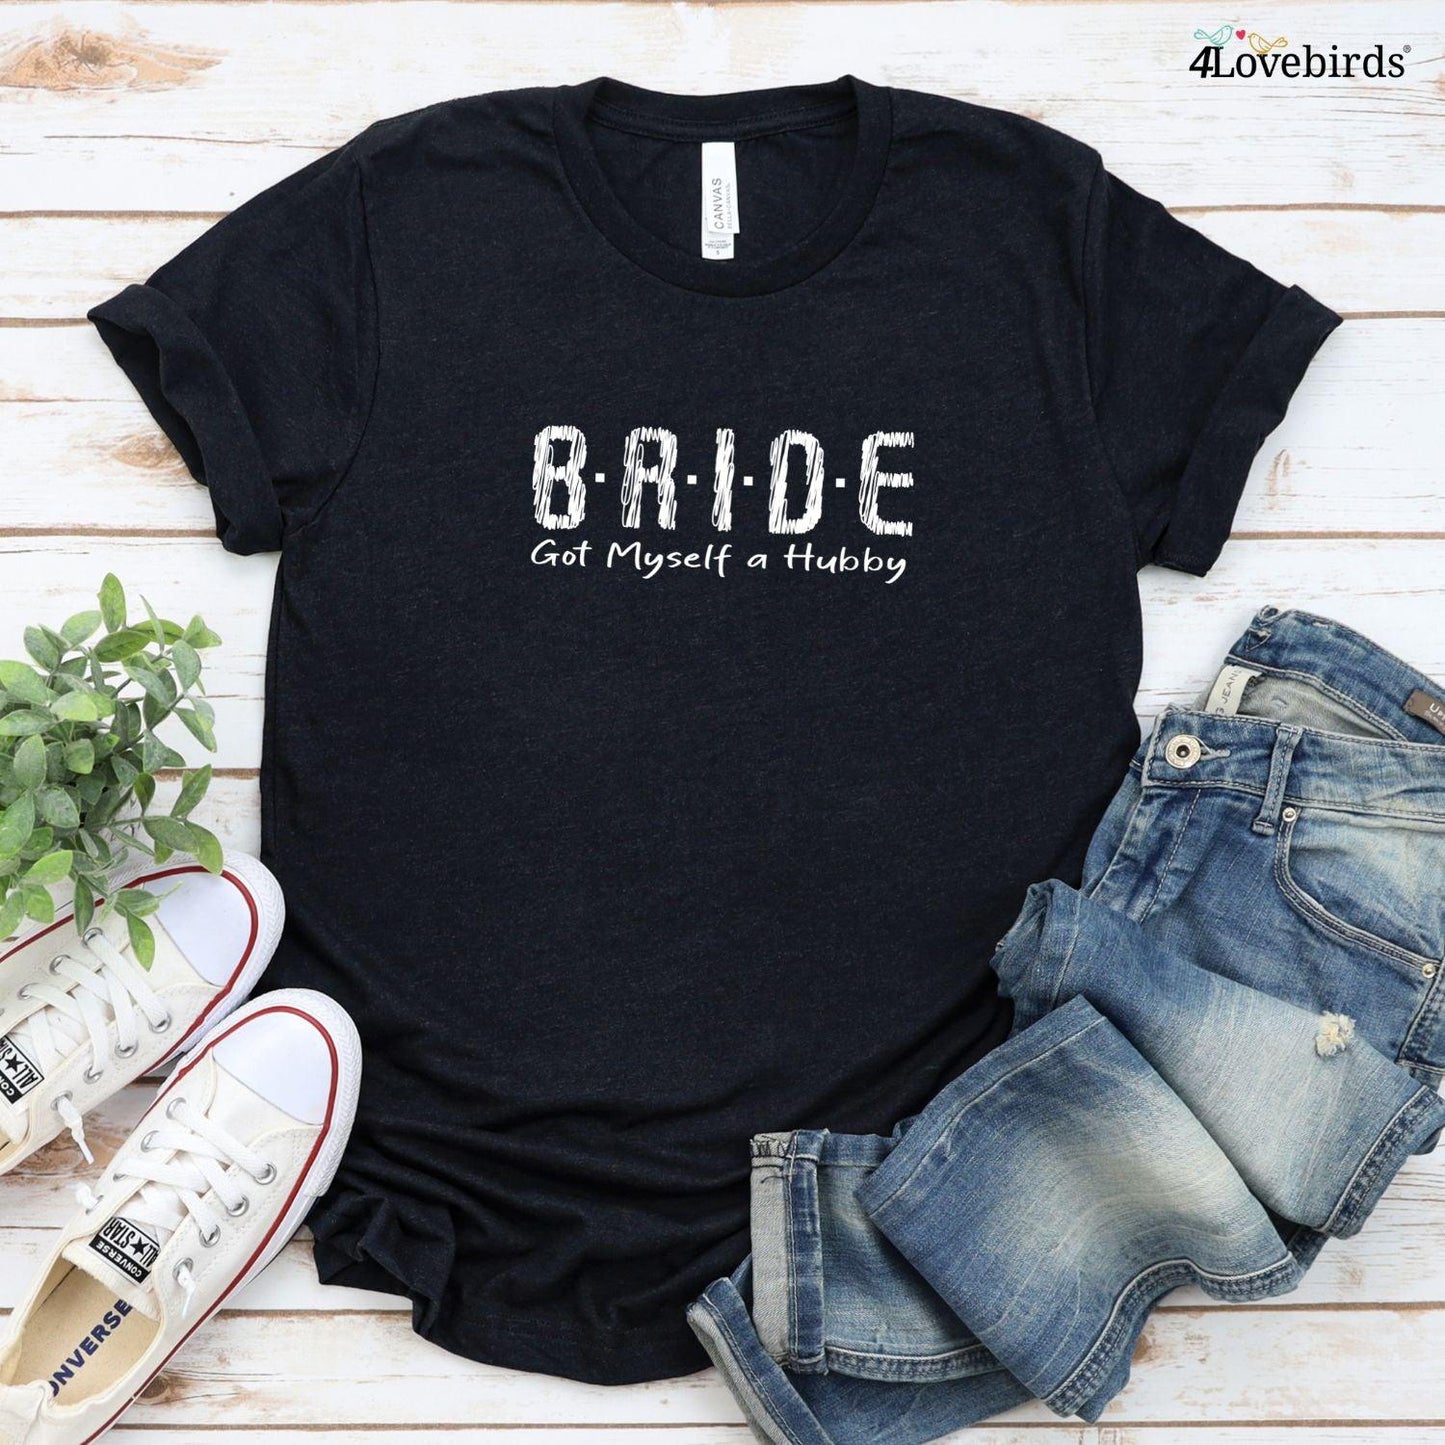 Matching Outfits for Bridal Party: Friends Bachelorette, I Do Crew, Maid of Honor, Bridesmaids - 4Lovebirds